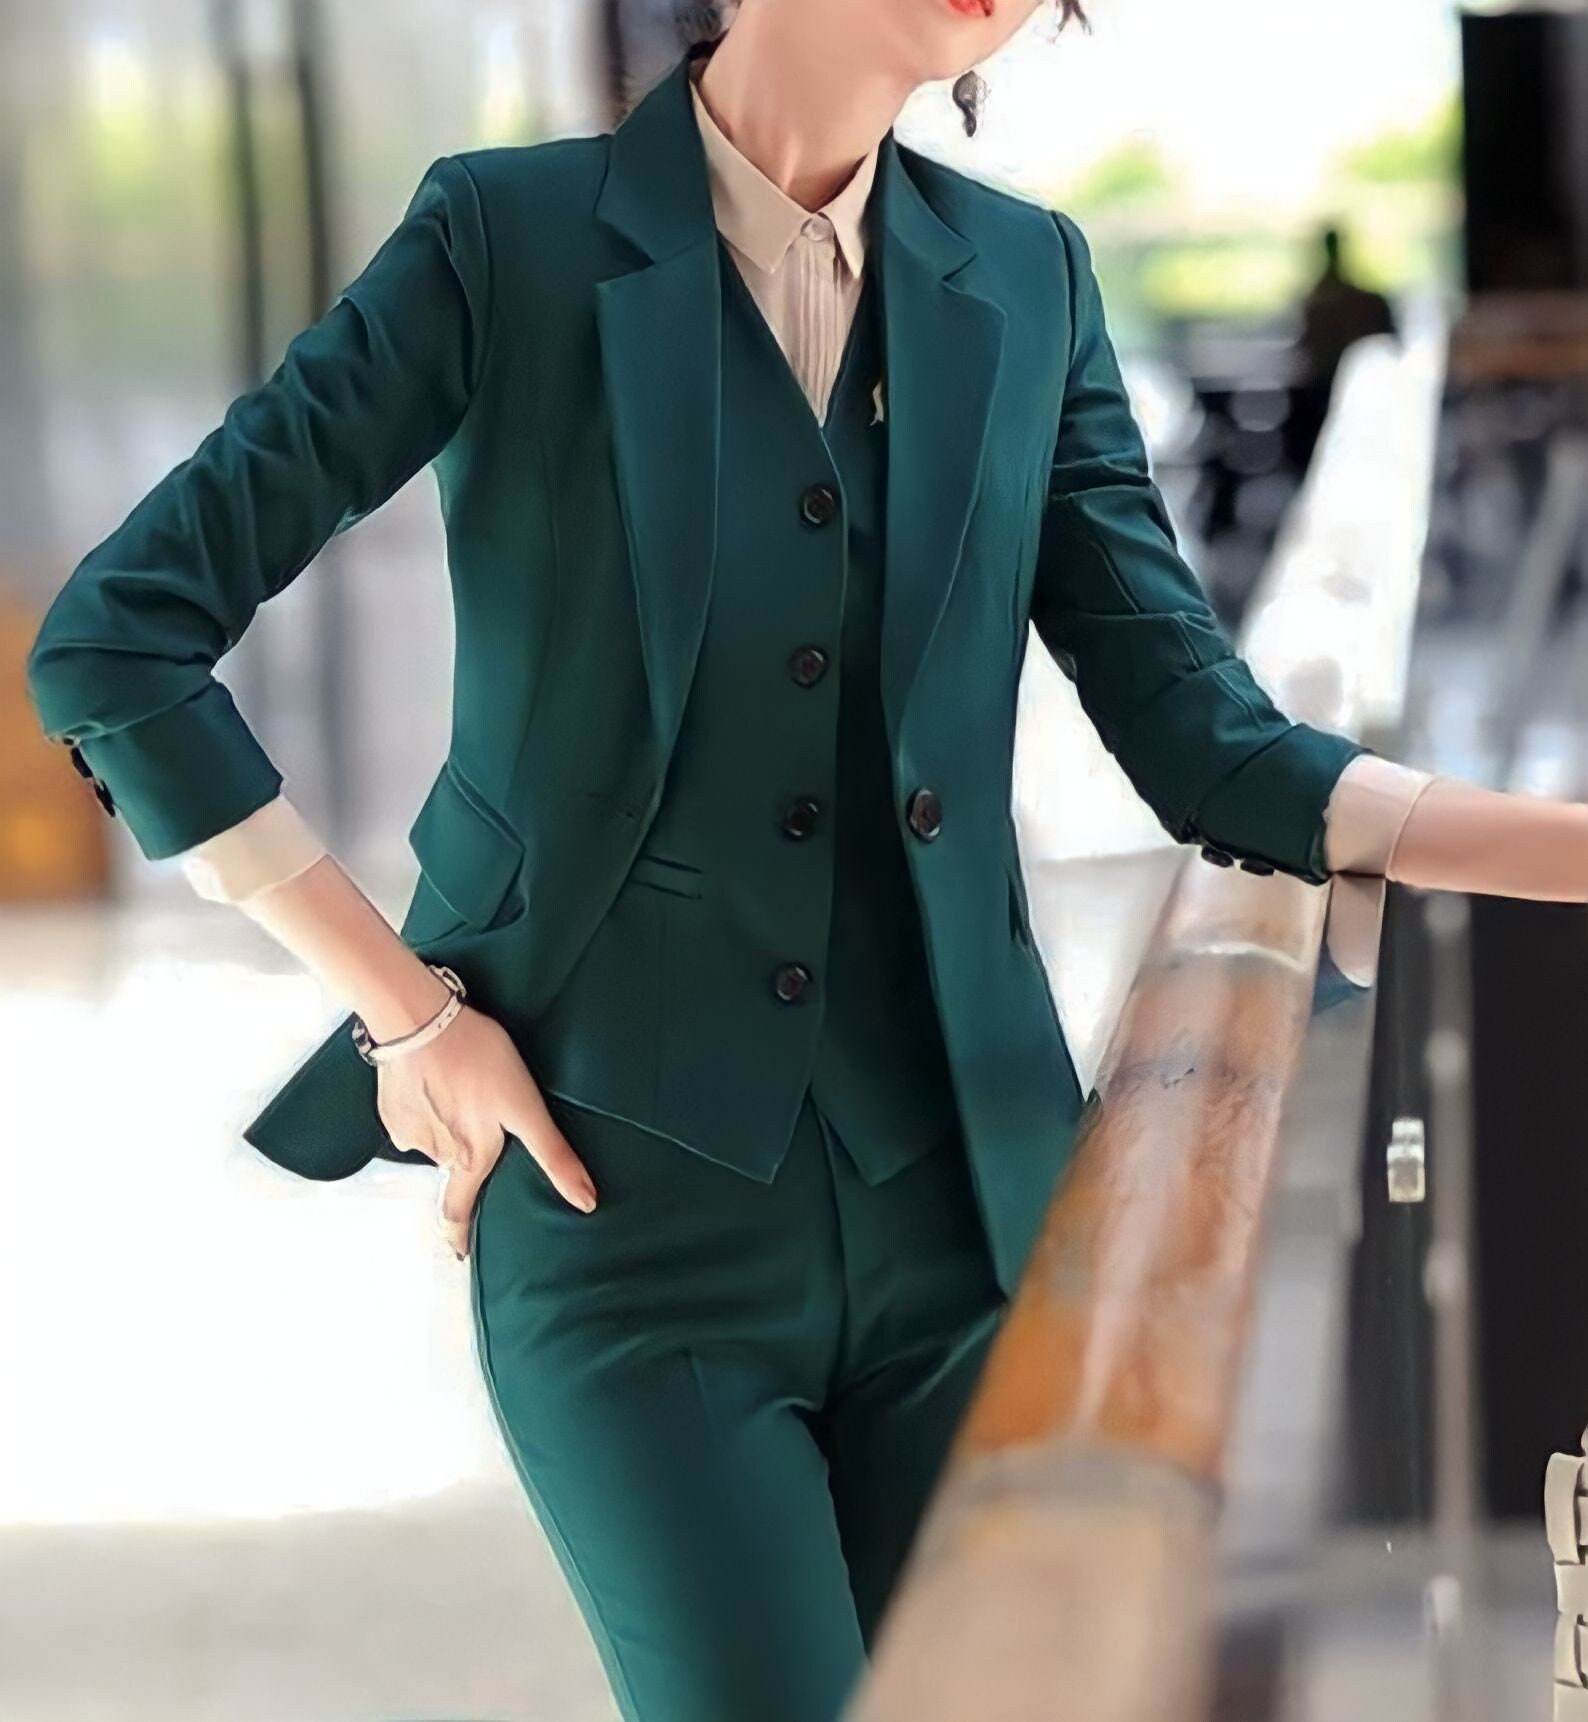 Women's 3 Piece Wedding Suits Prom Green Suits Women Notch Lapel Formal  Fashion Suit Party Wear Suits Gift for Him 